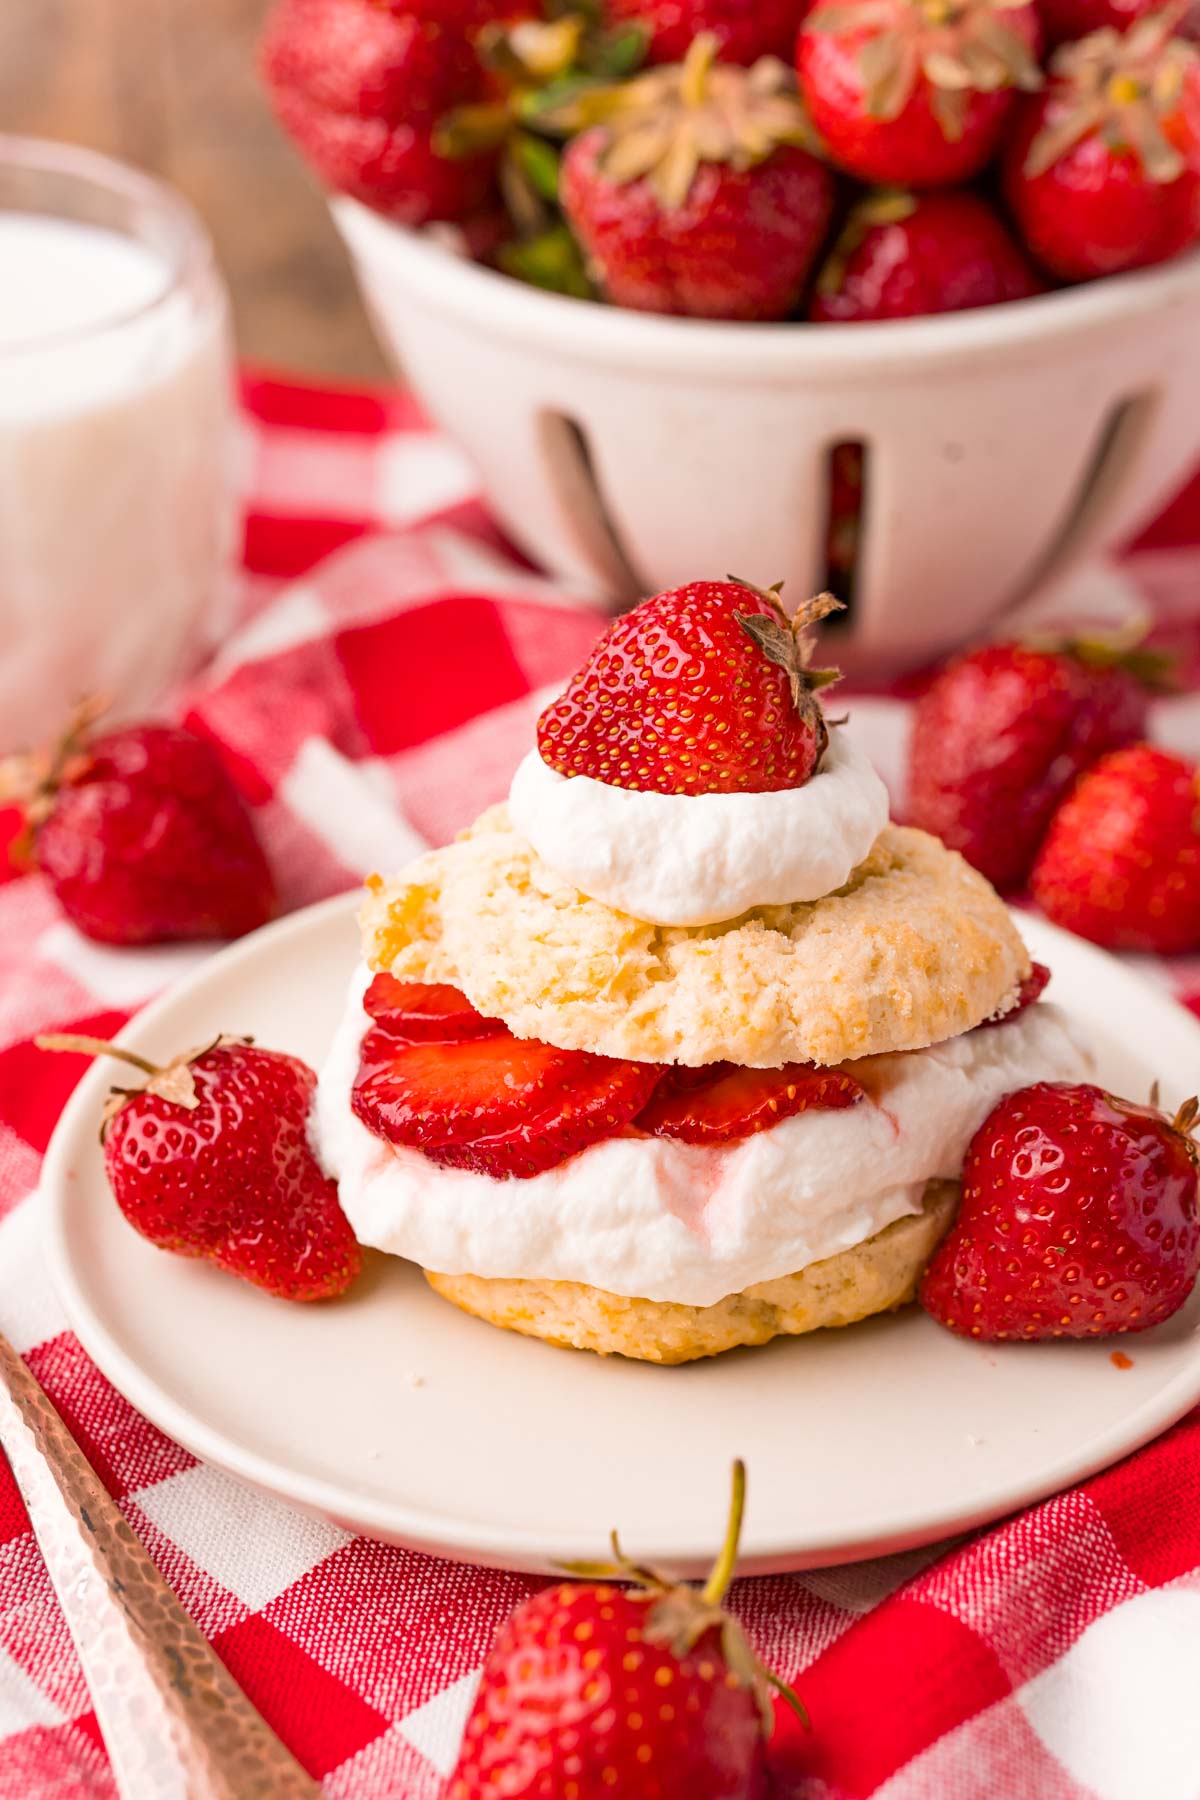 Strawberry shortcake on a tan plate on a red and white checkered napkin.